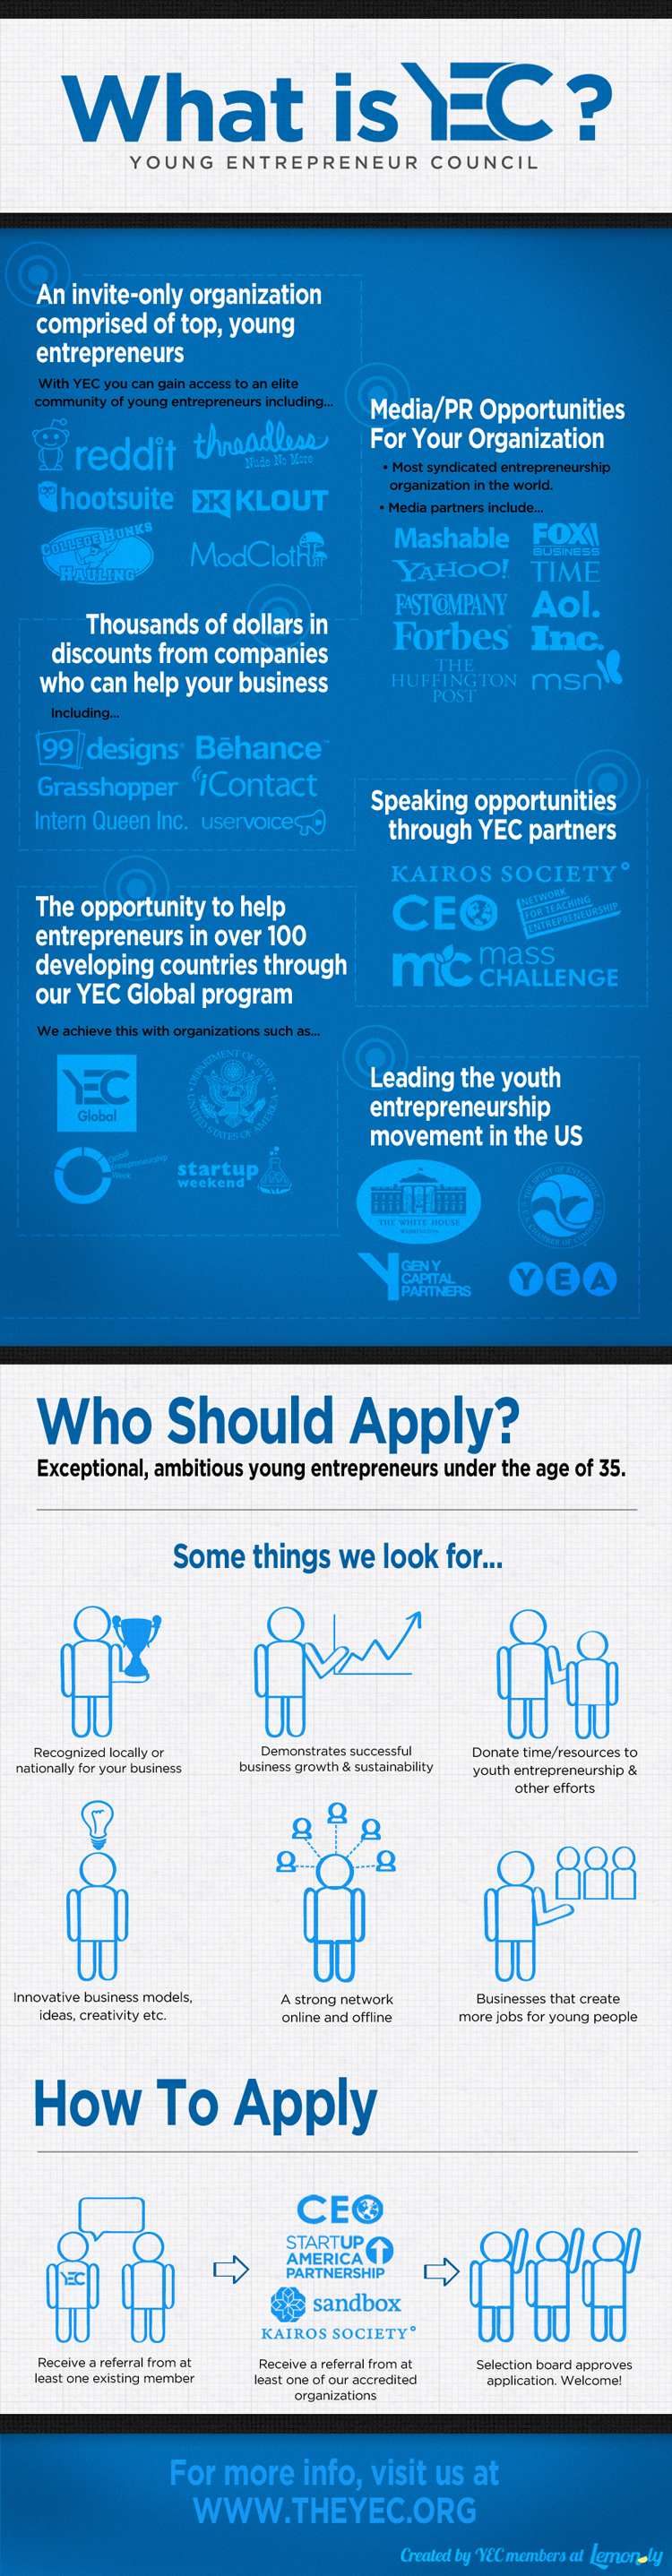 What Is YEC?